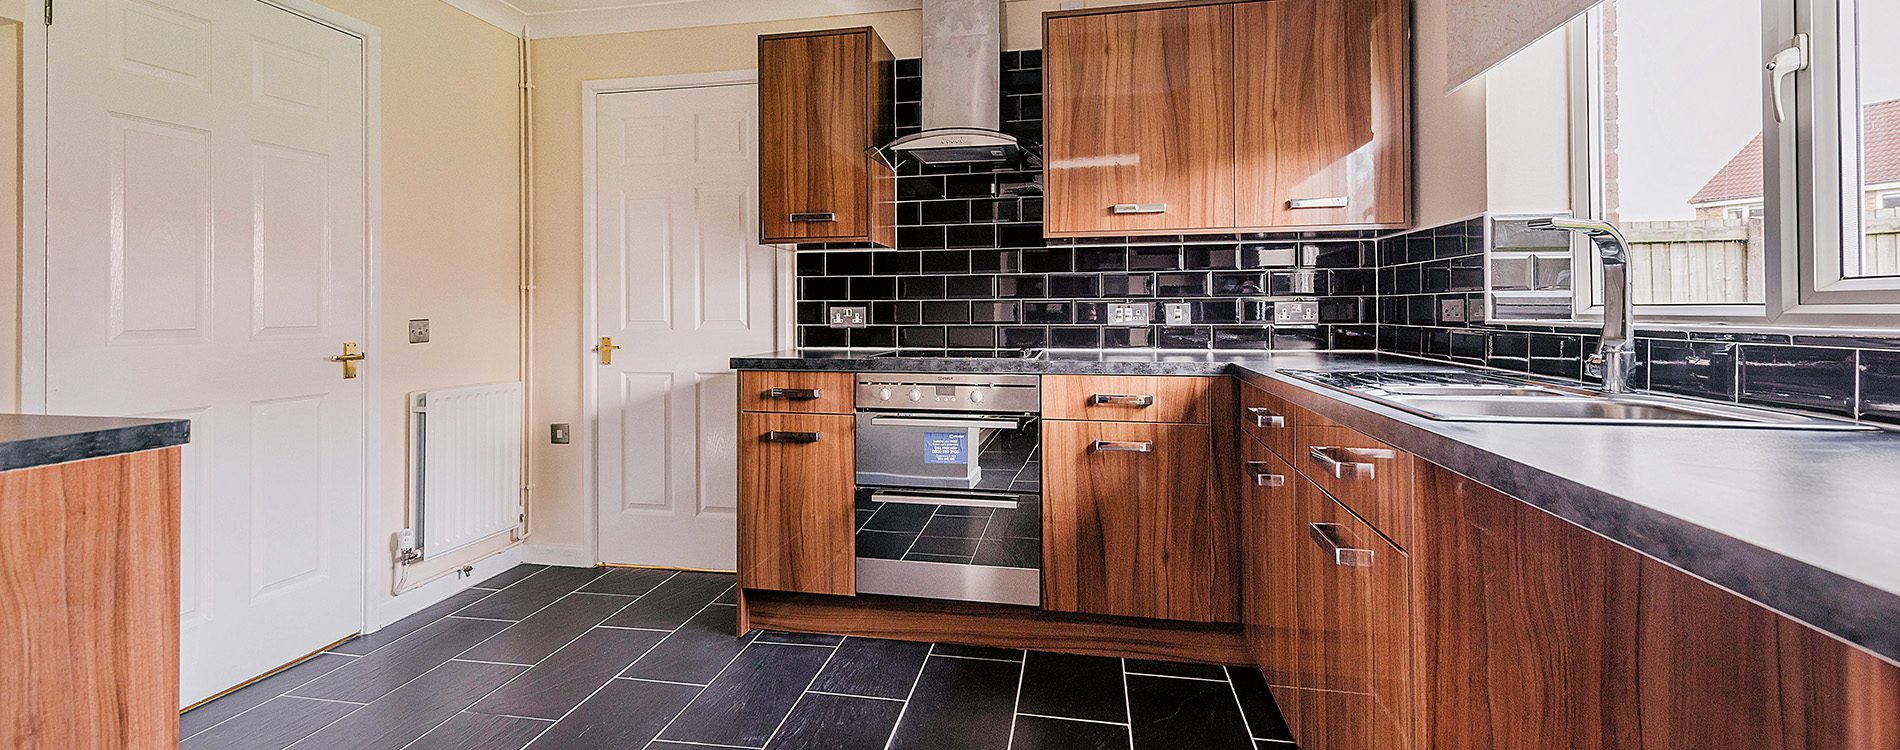 Large kitchen in residential property